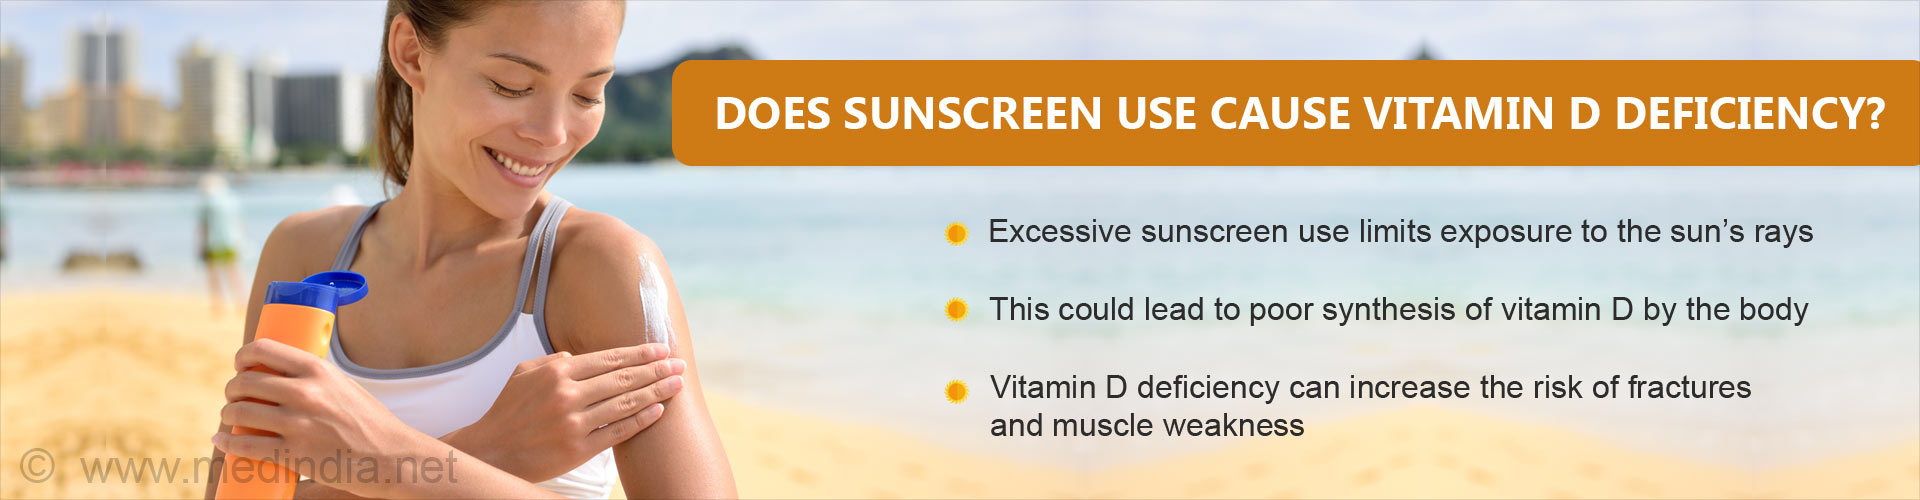 Does sunscreen use cause vitamin D deficiency?
- Excessive sunscreen use limits exposure to the sun''s rays
- This could lead to poor synthesis of vitamin D by the body
- Vitamin D deficiency can increase the risk of fractures and muscule weakness